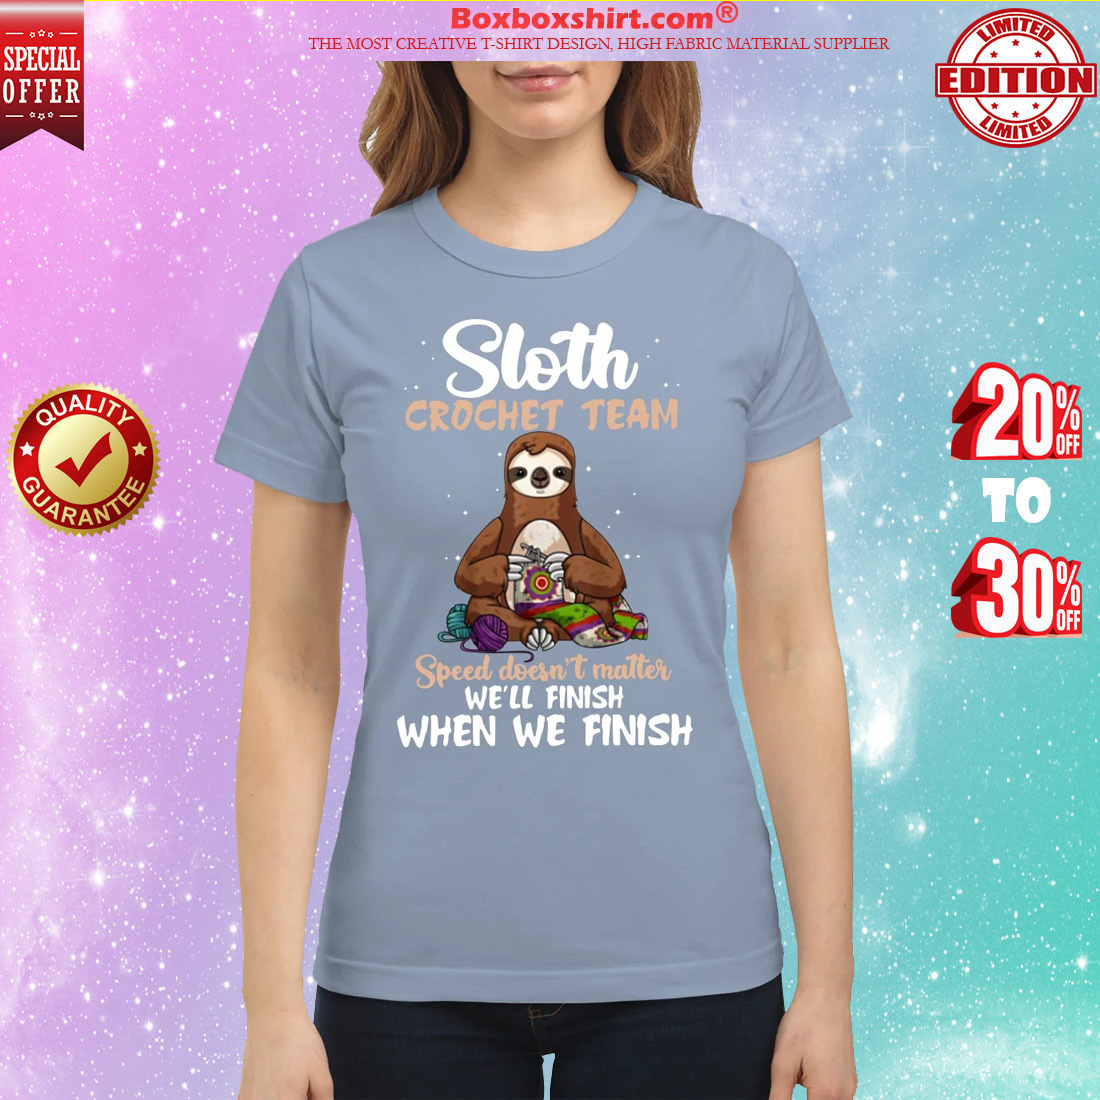 Sloth crochet team speed doesn't matter we'll finish when we finish classic shirt